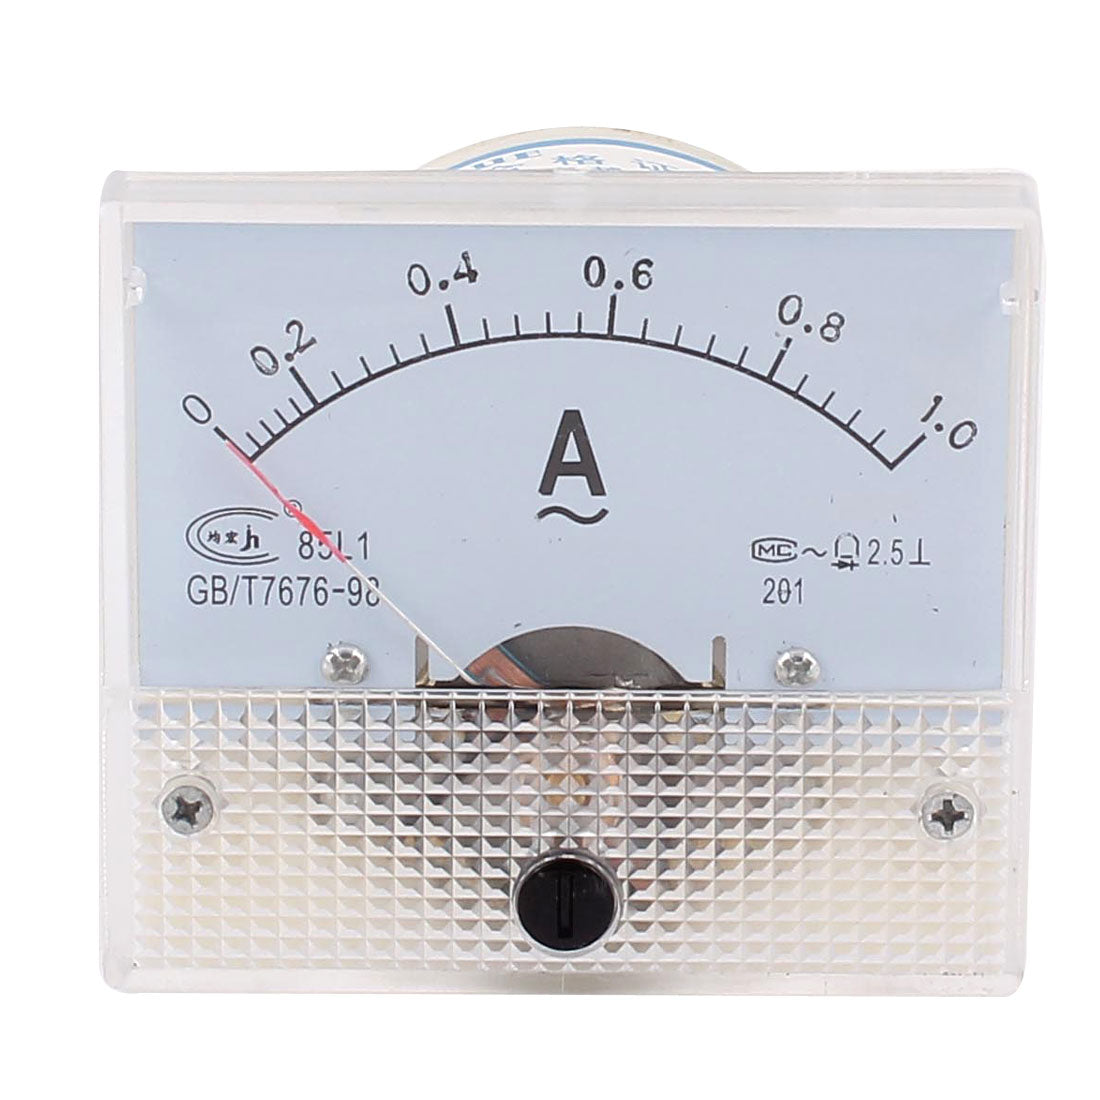 uxcell Uxcell AC 1A 85L1 Analog Panel Current Ampere Meter Ammeter Gauge 0-1A